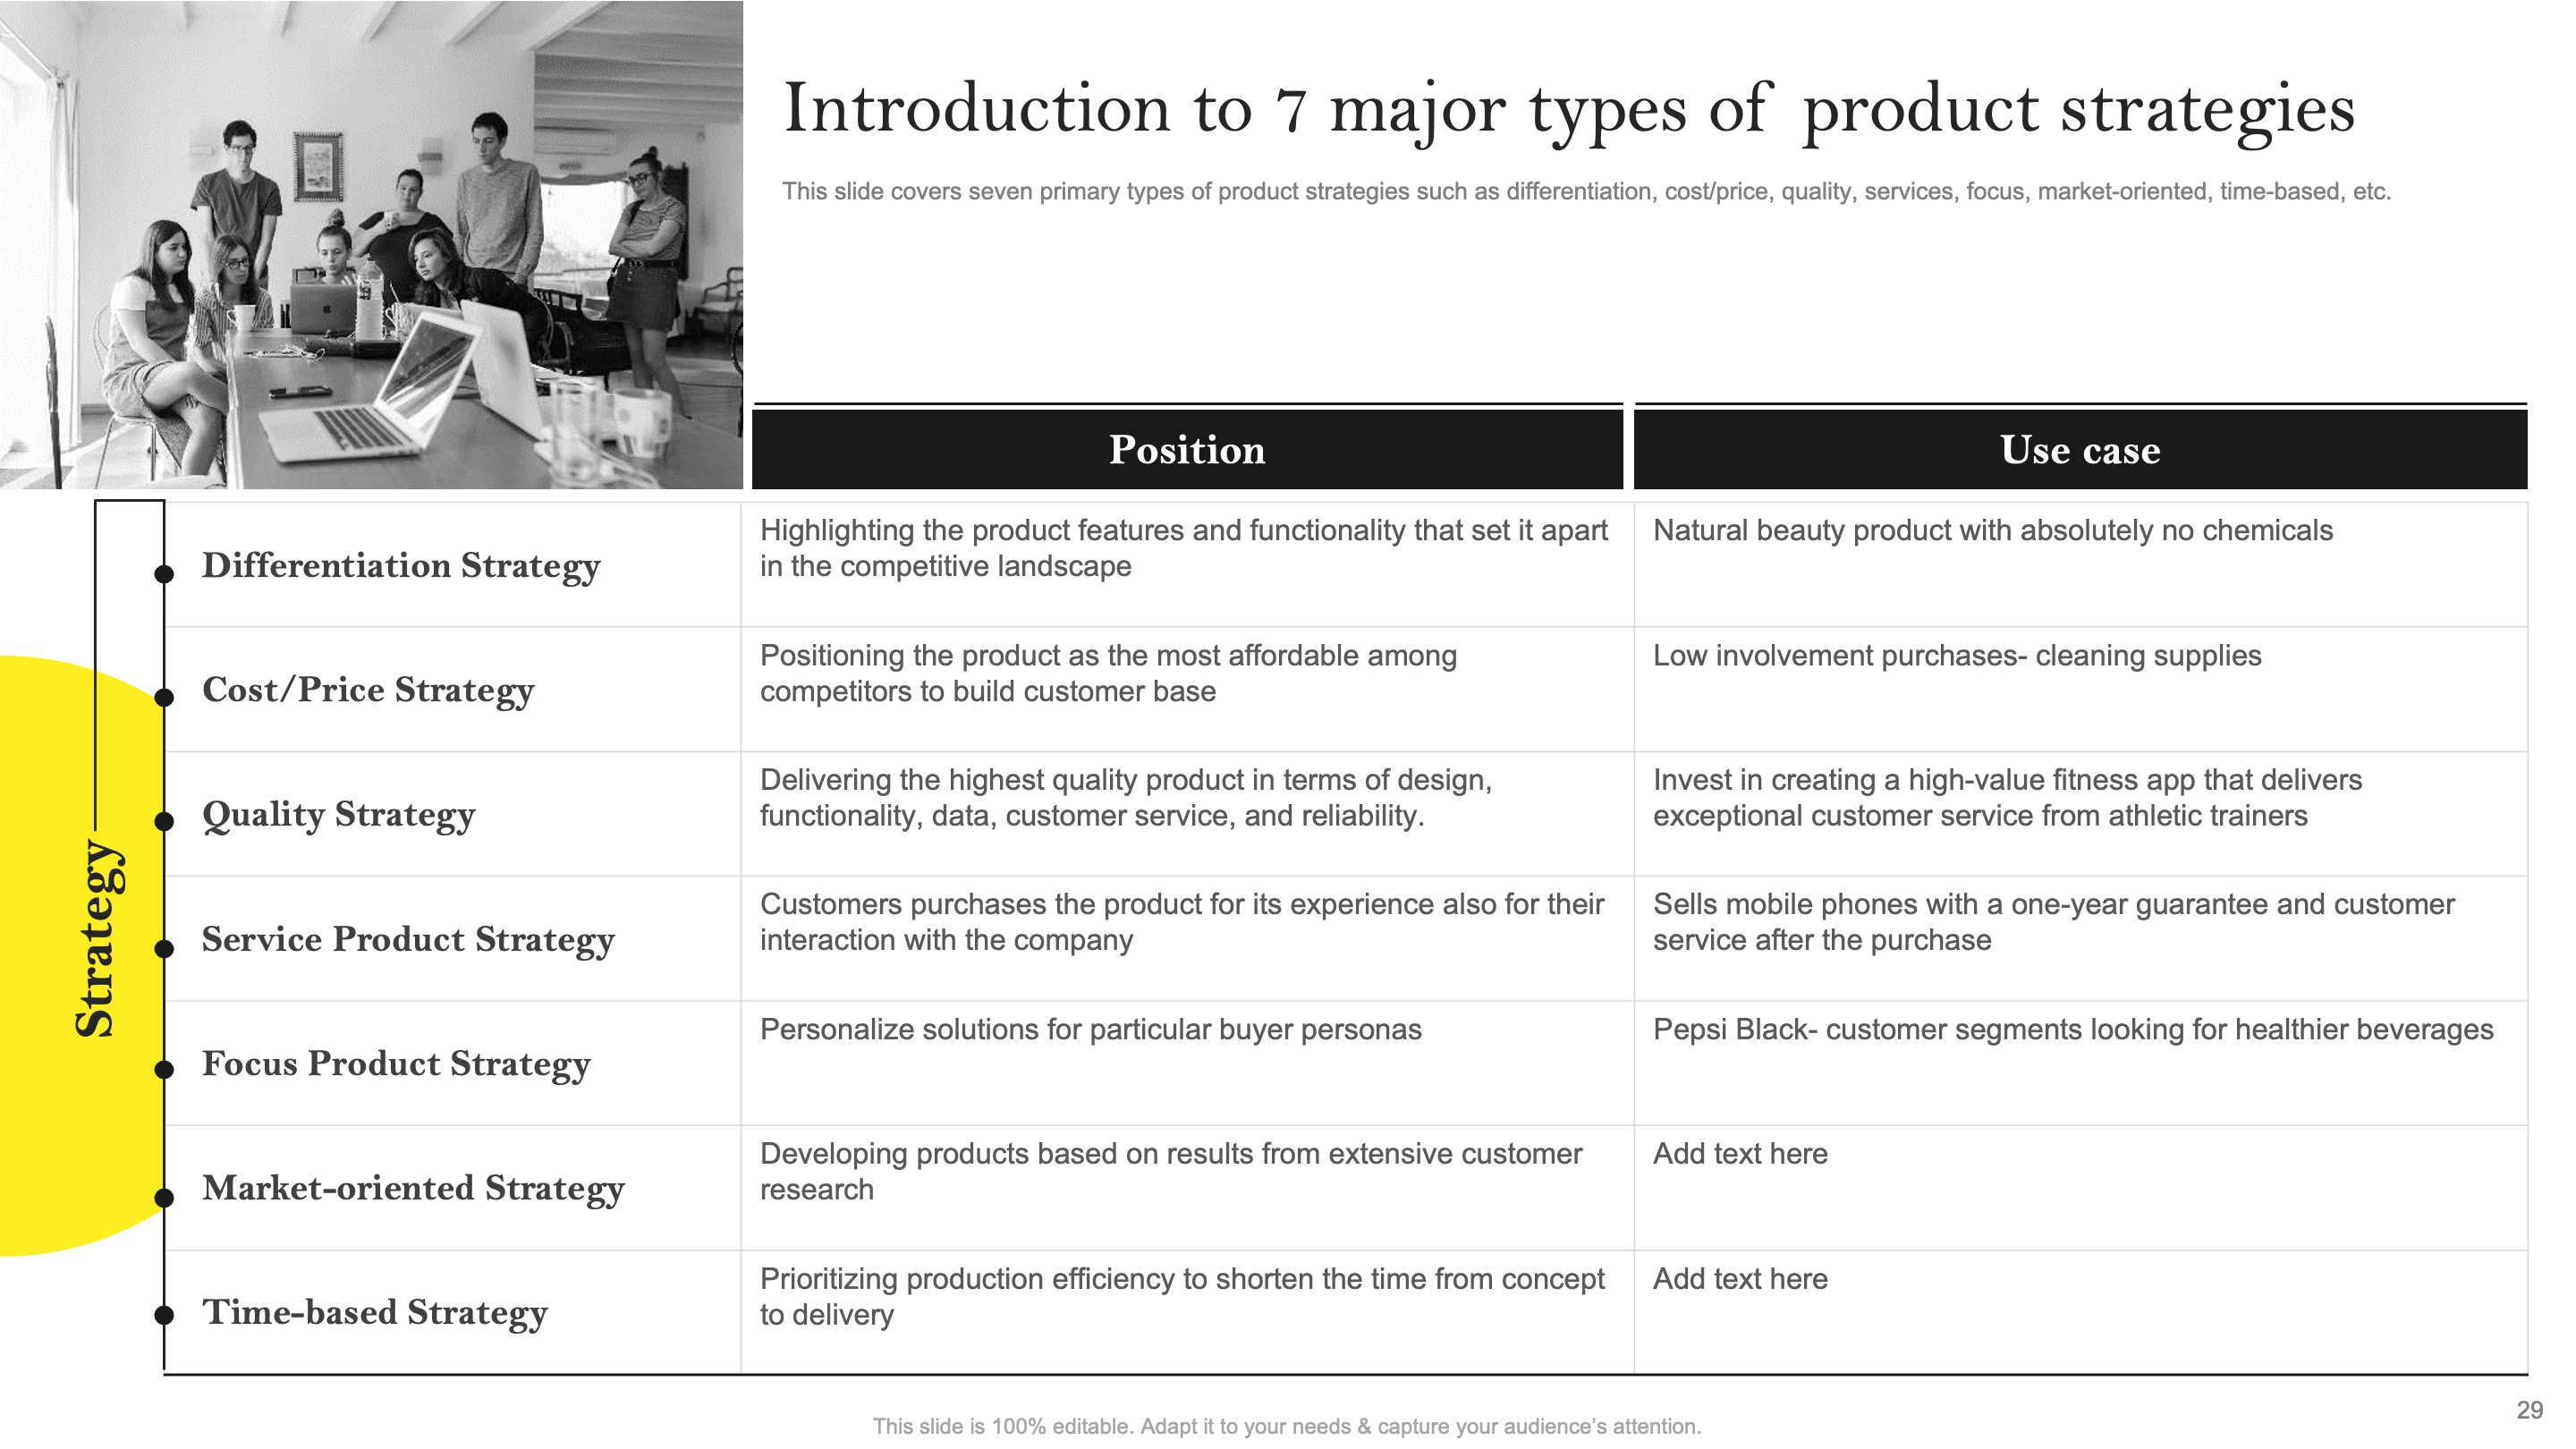 Introduction to 7 Major Types of Product Strategies